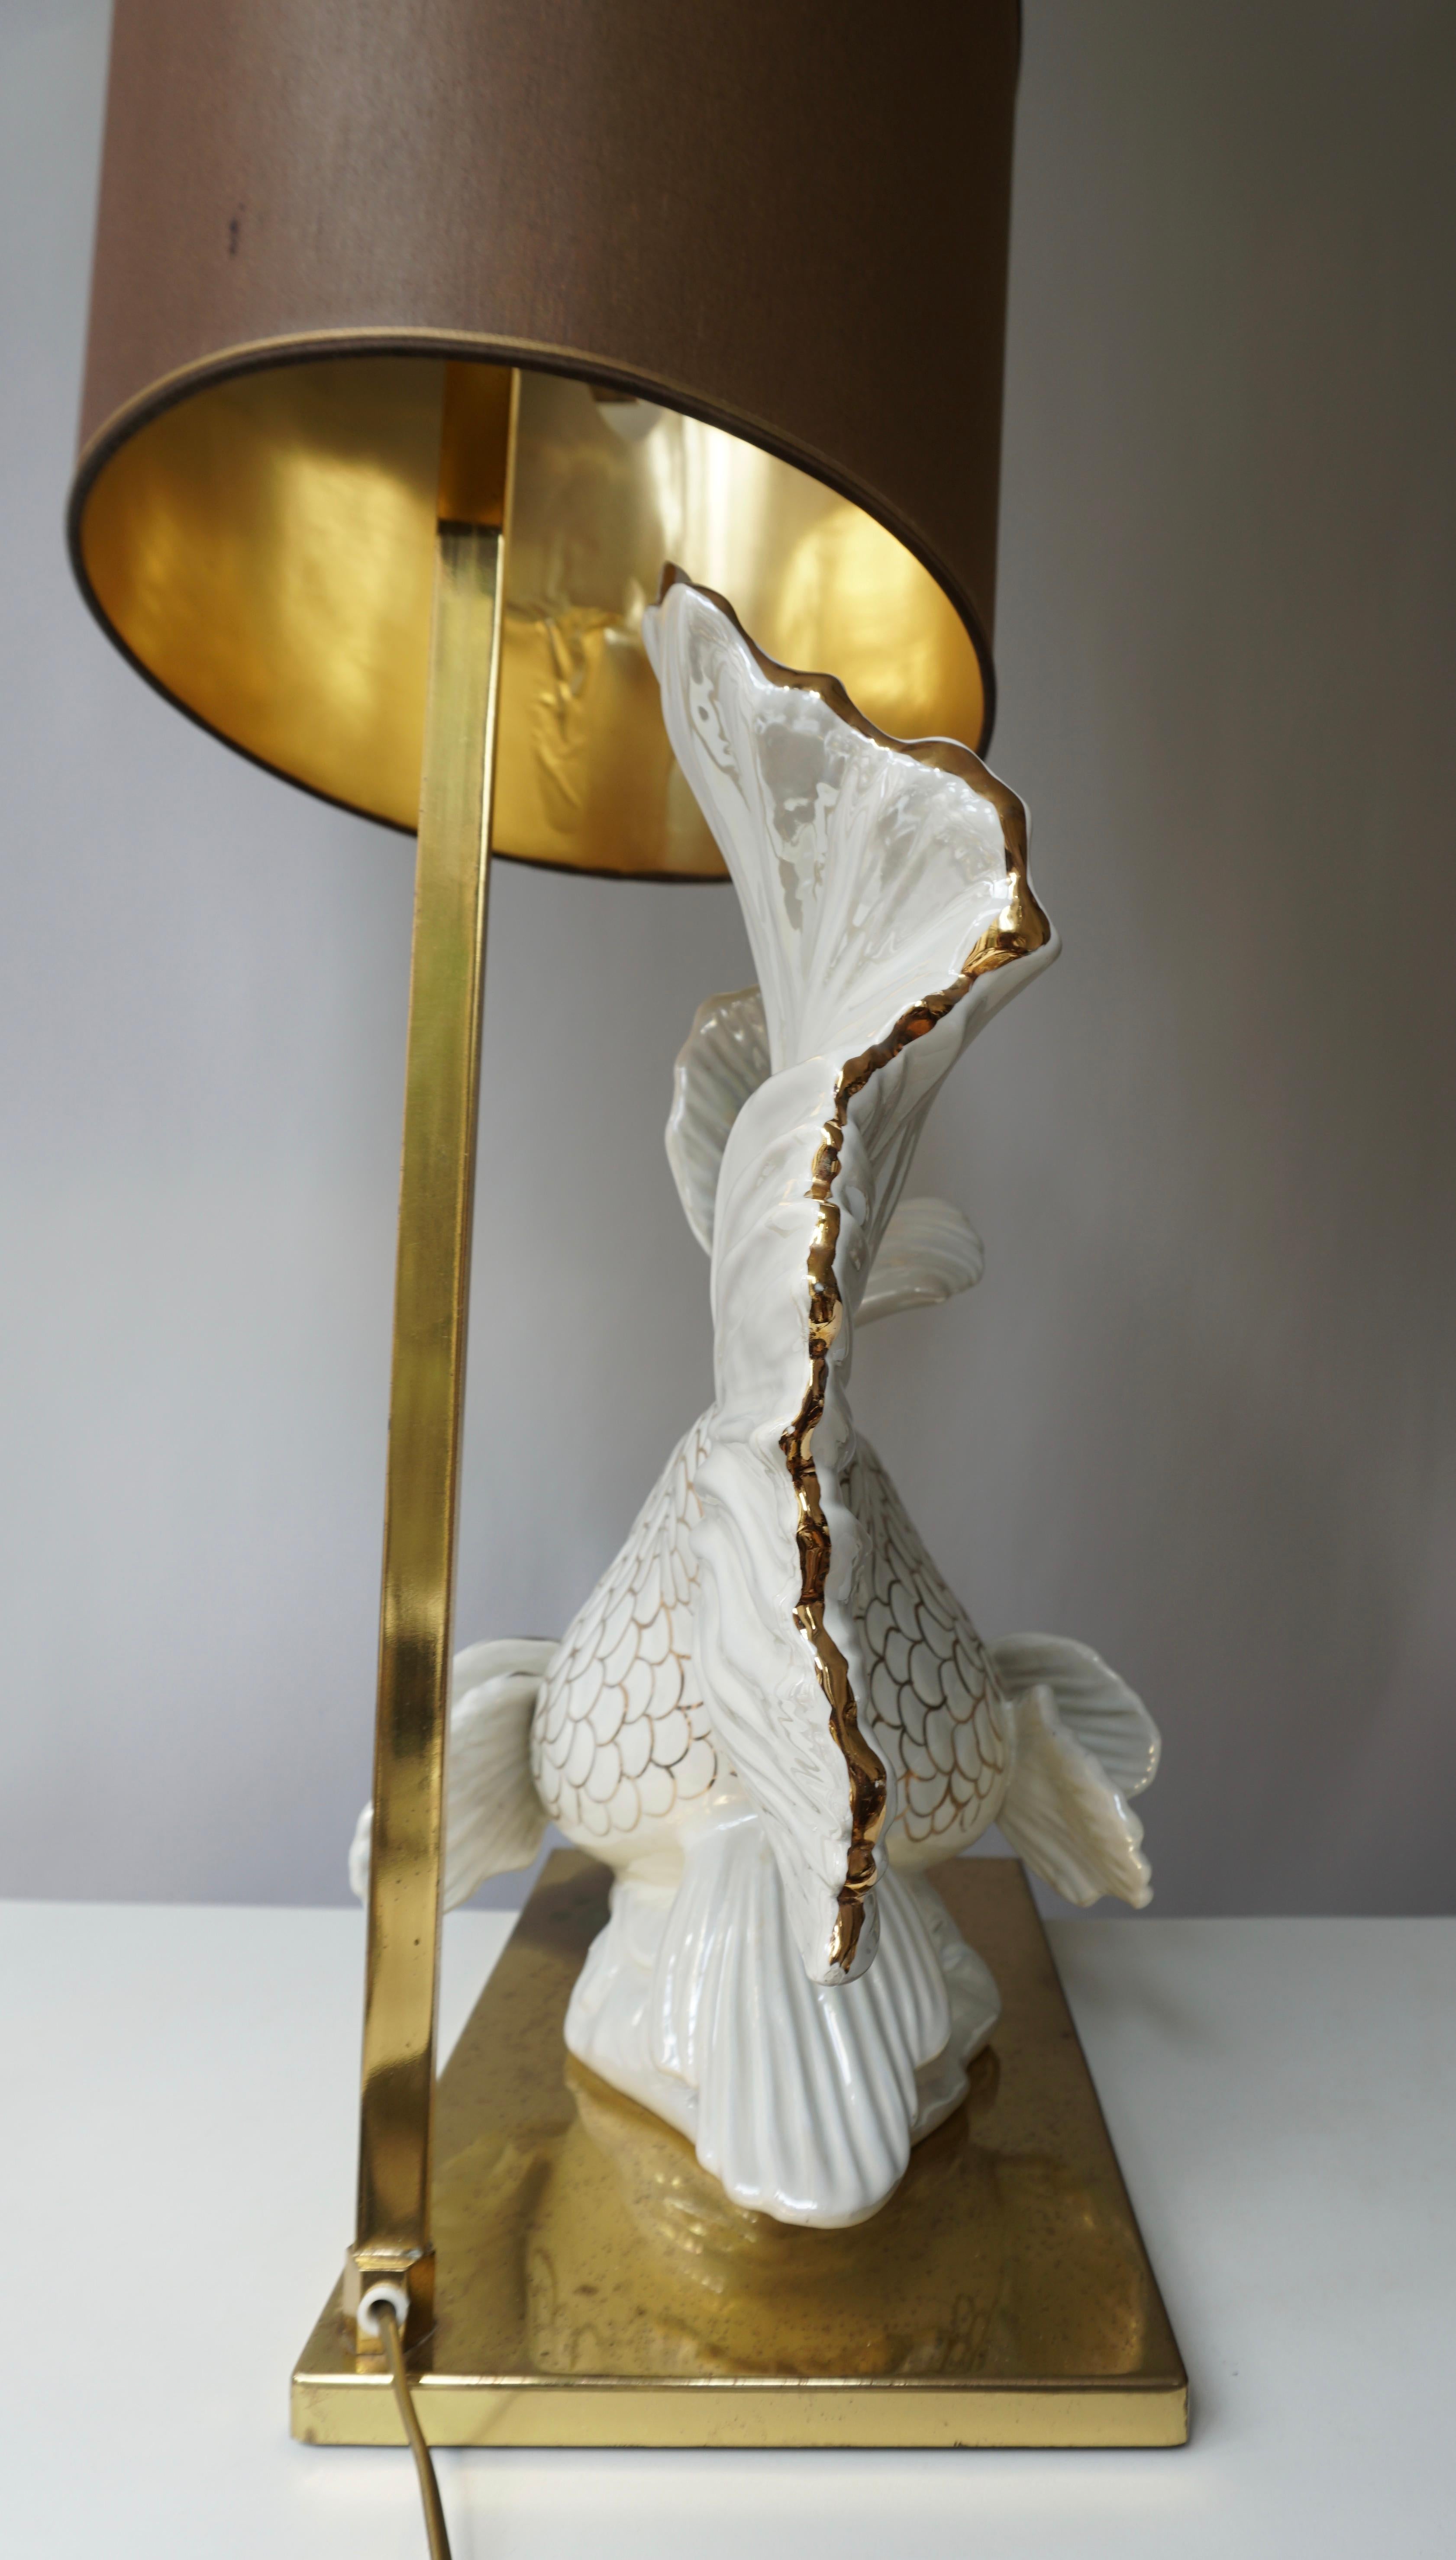 20th Century Italian Midcentury Big Ceramic Fish Lamp with Brass Details, 1970s For Sale